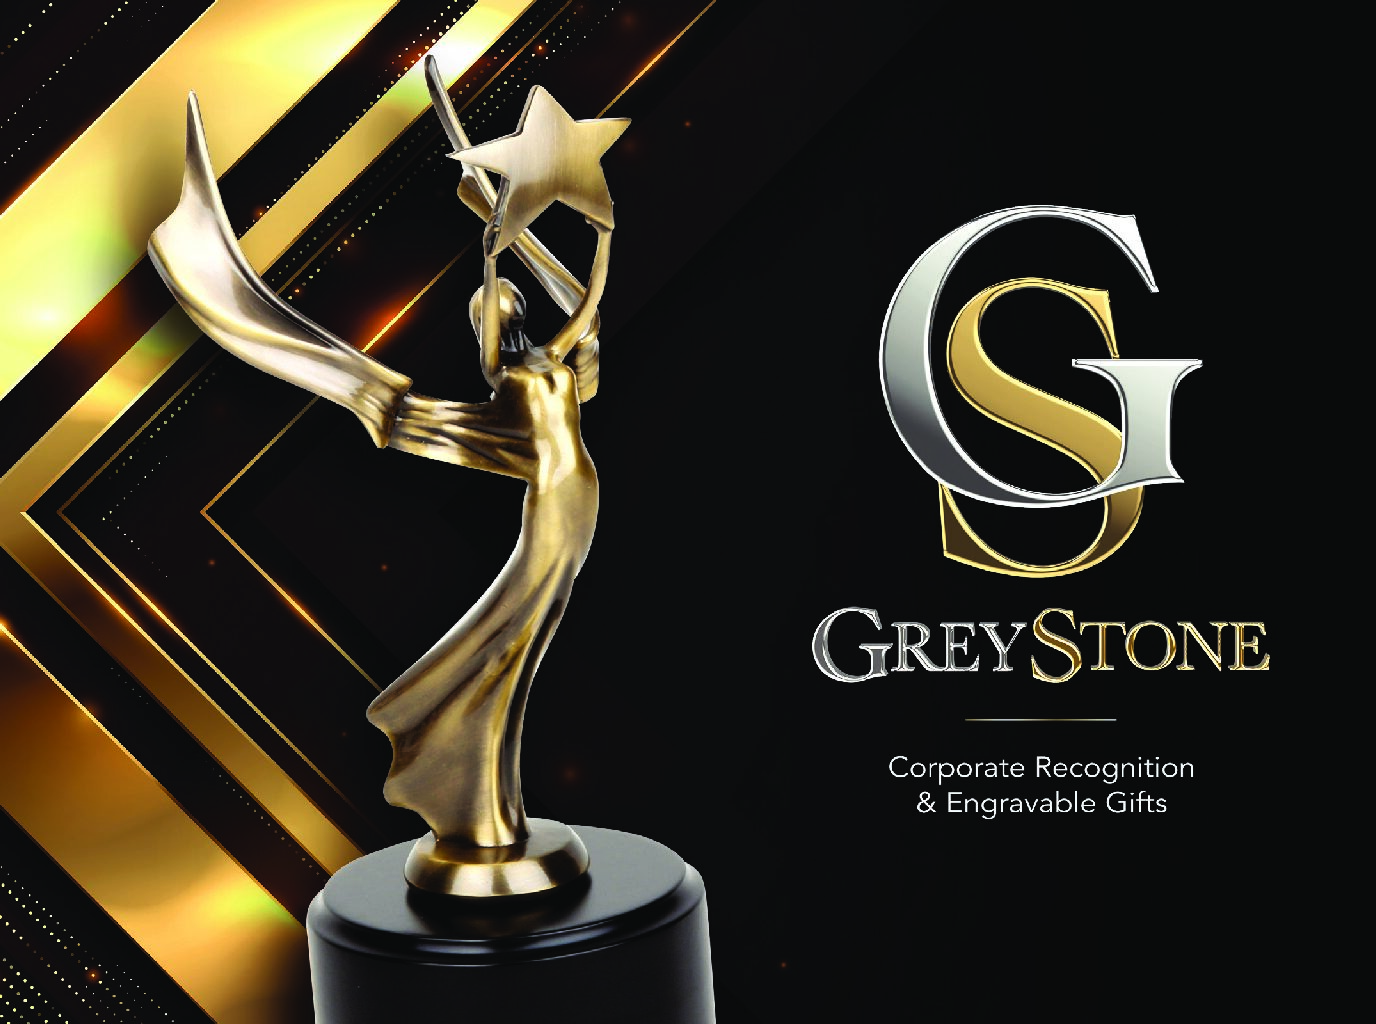 GREY STONE CORPORATE RECOGNITION & ENGRAVABLE GIFTS